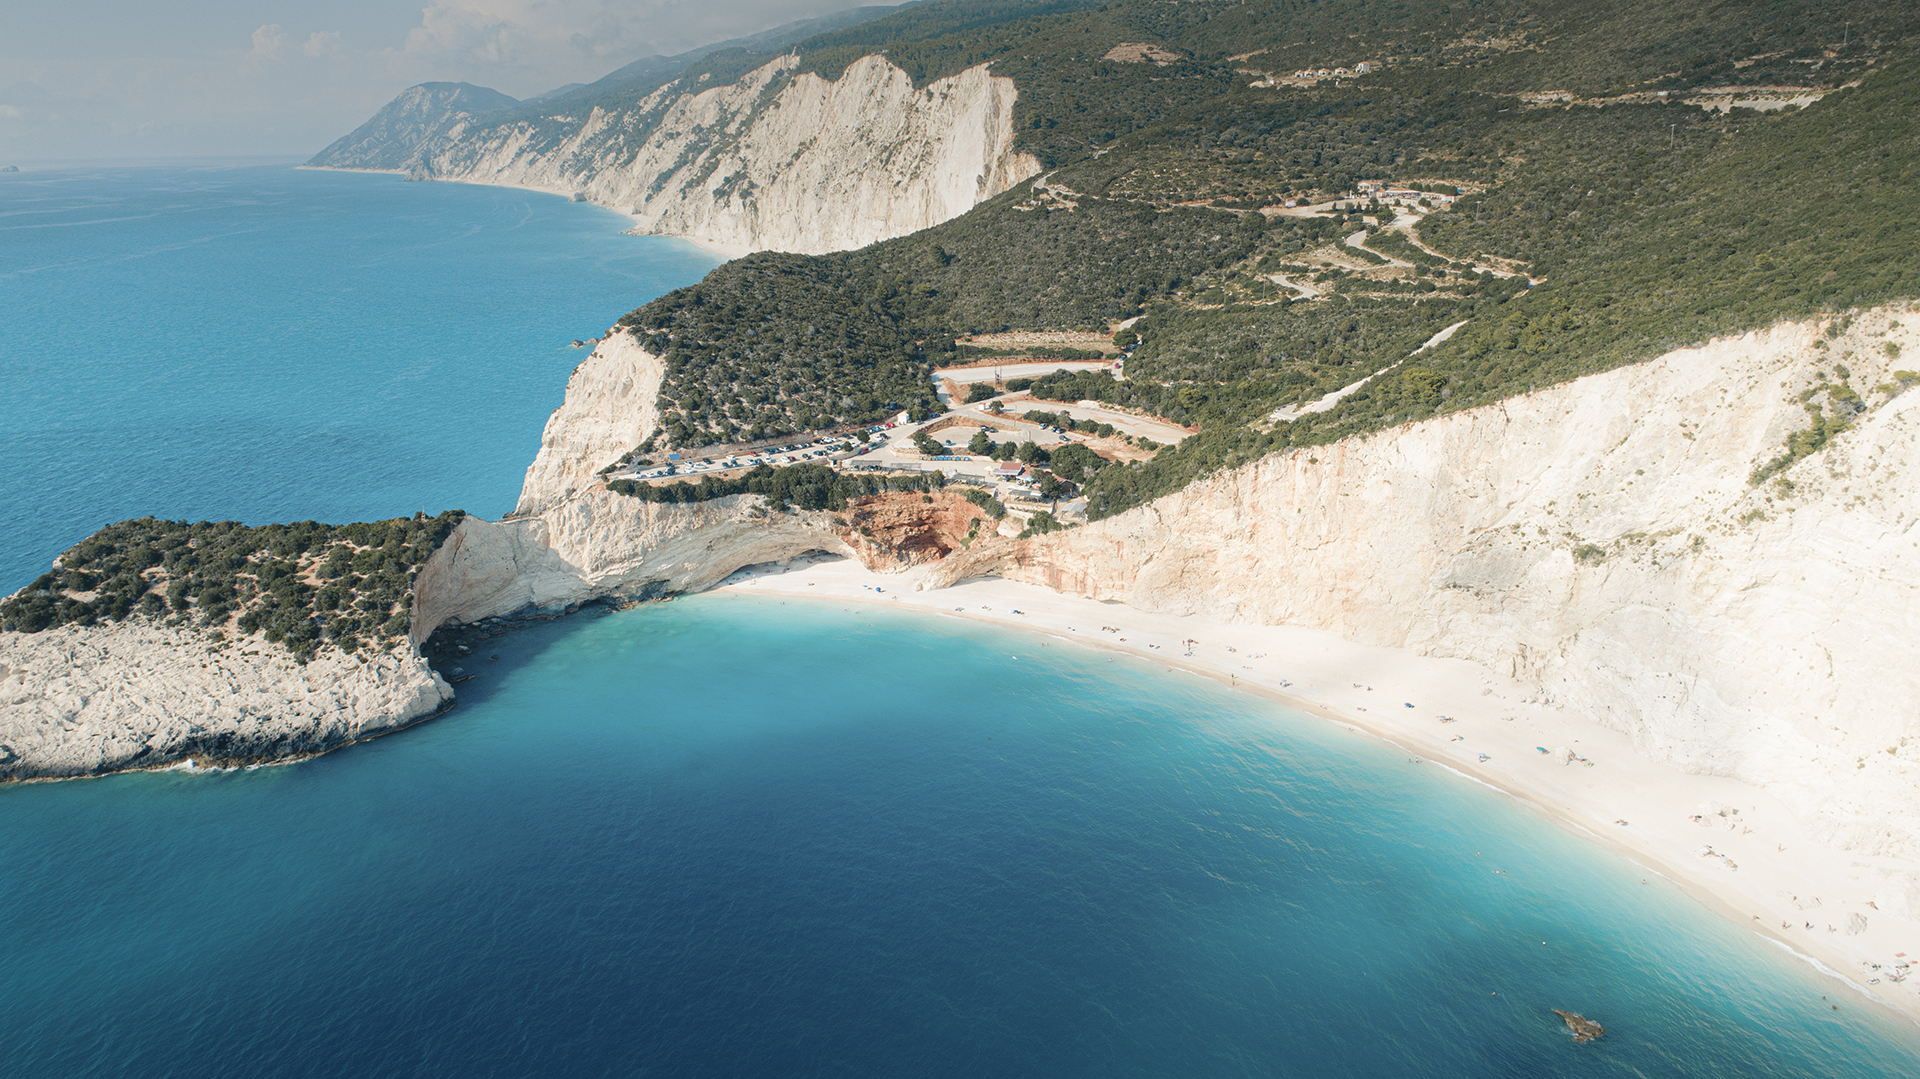 Lefkada Geographical Notes